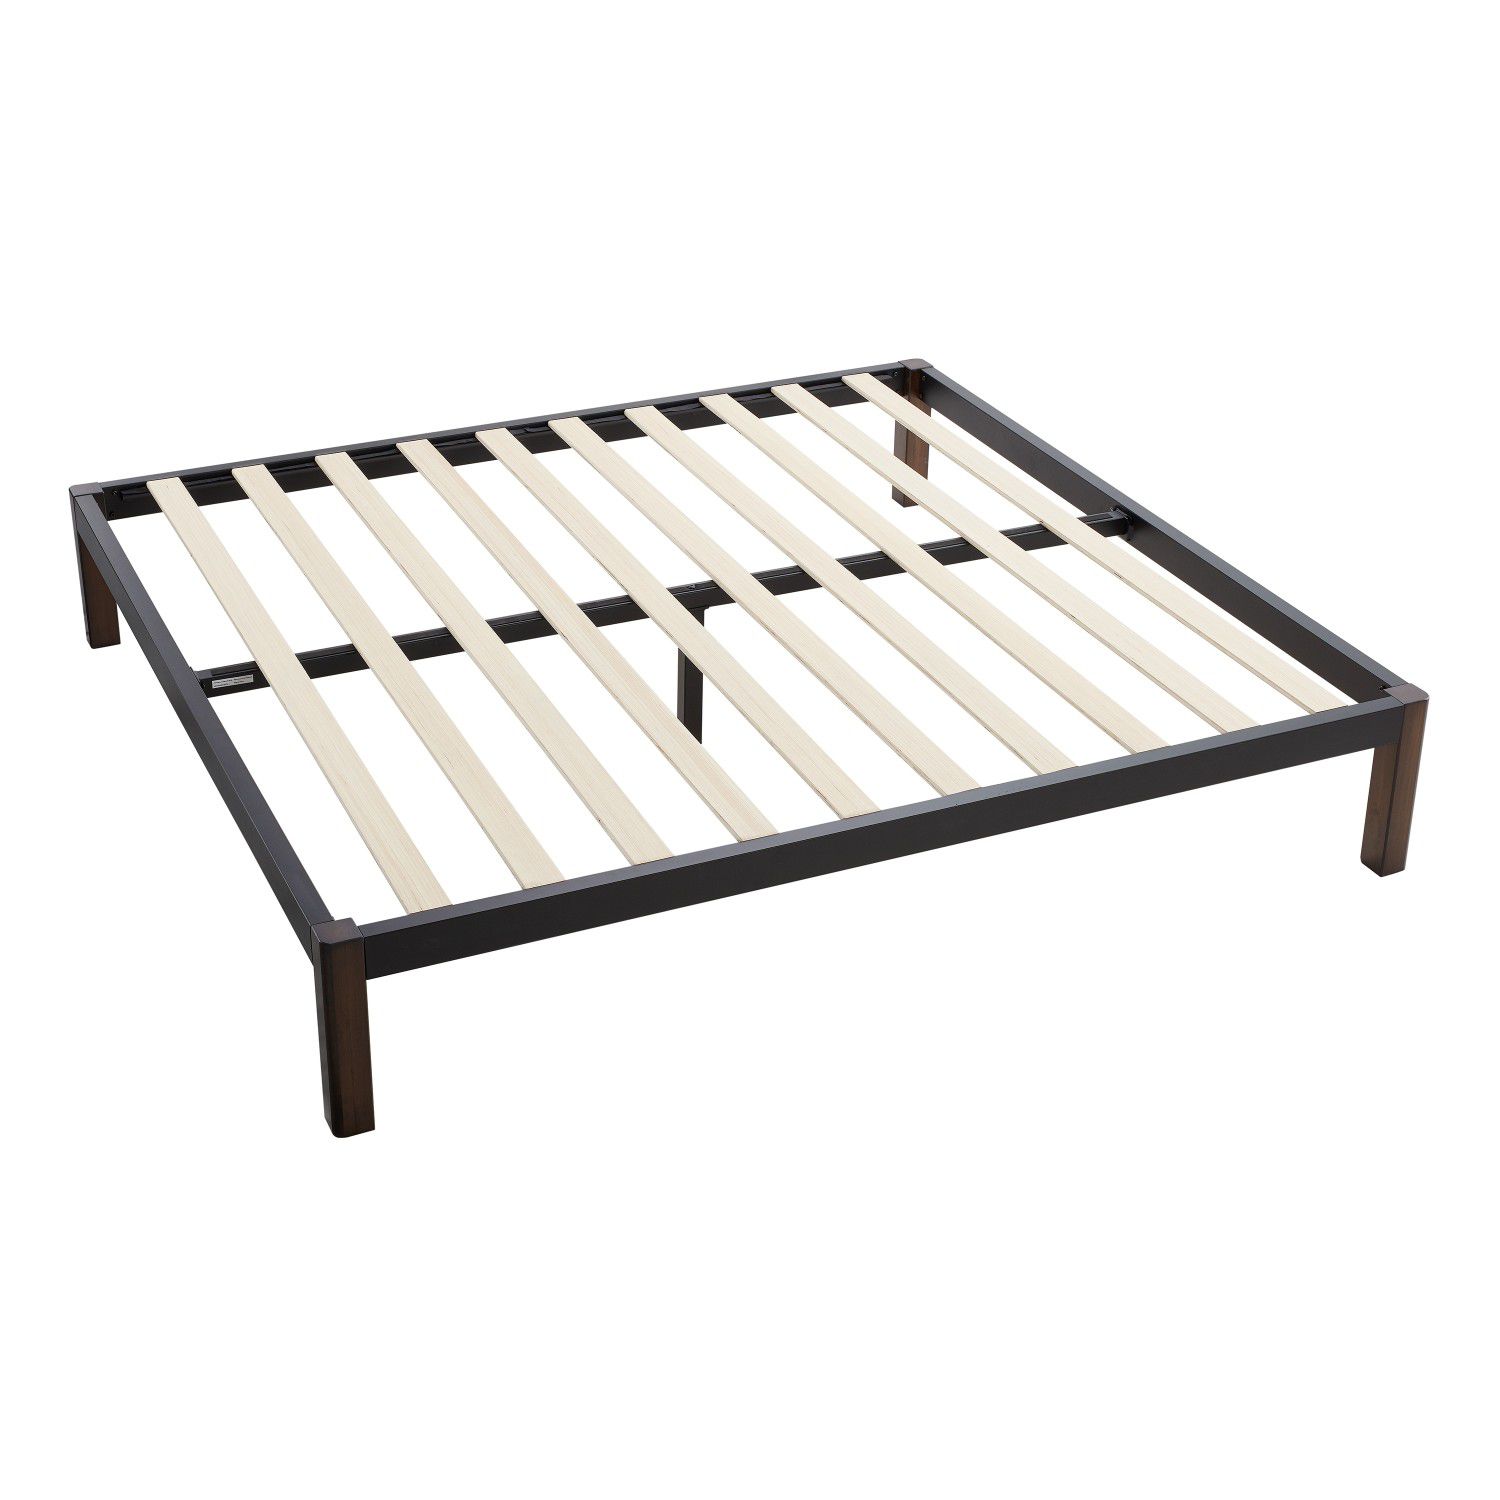 King size Mainstays Metal Bed Frame with 4 twin mattresses + pillows